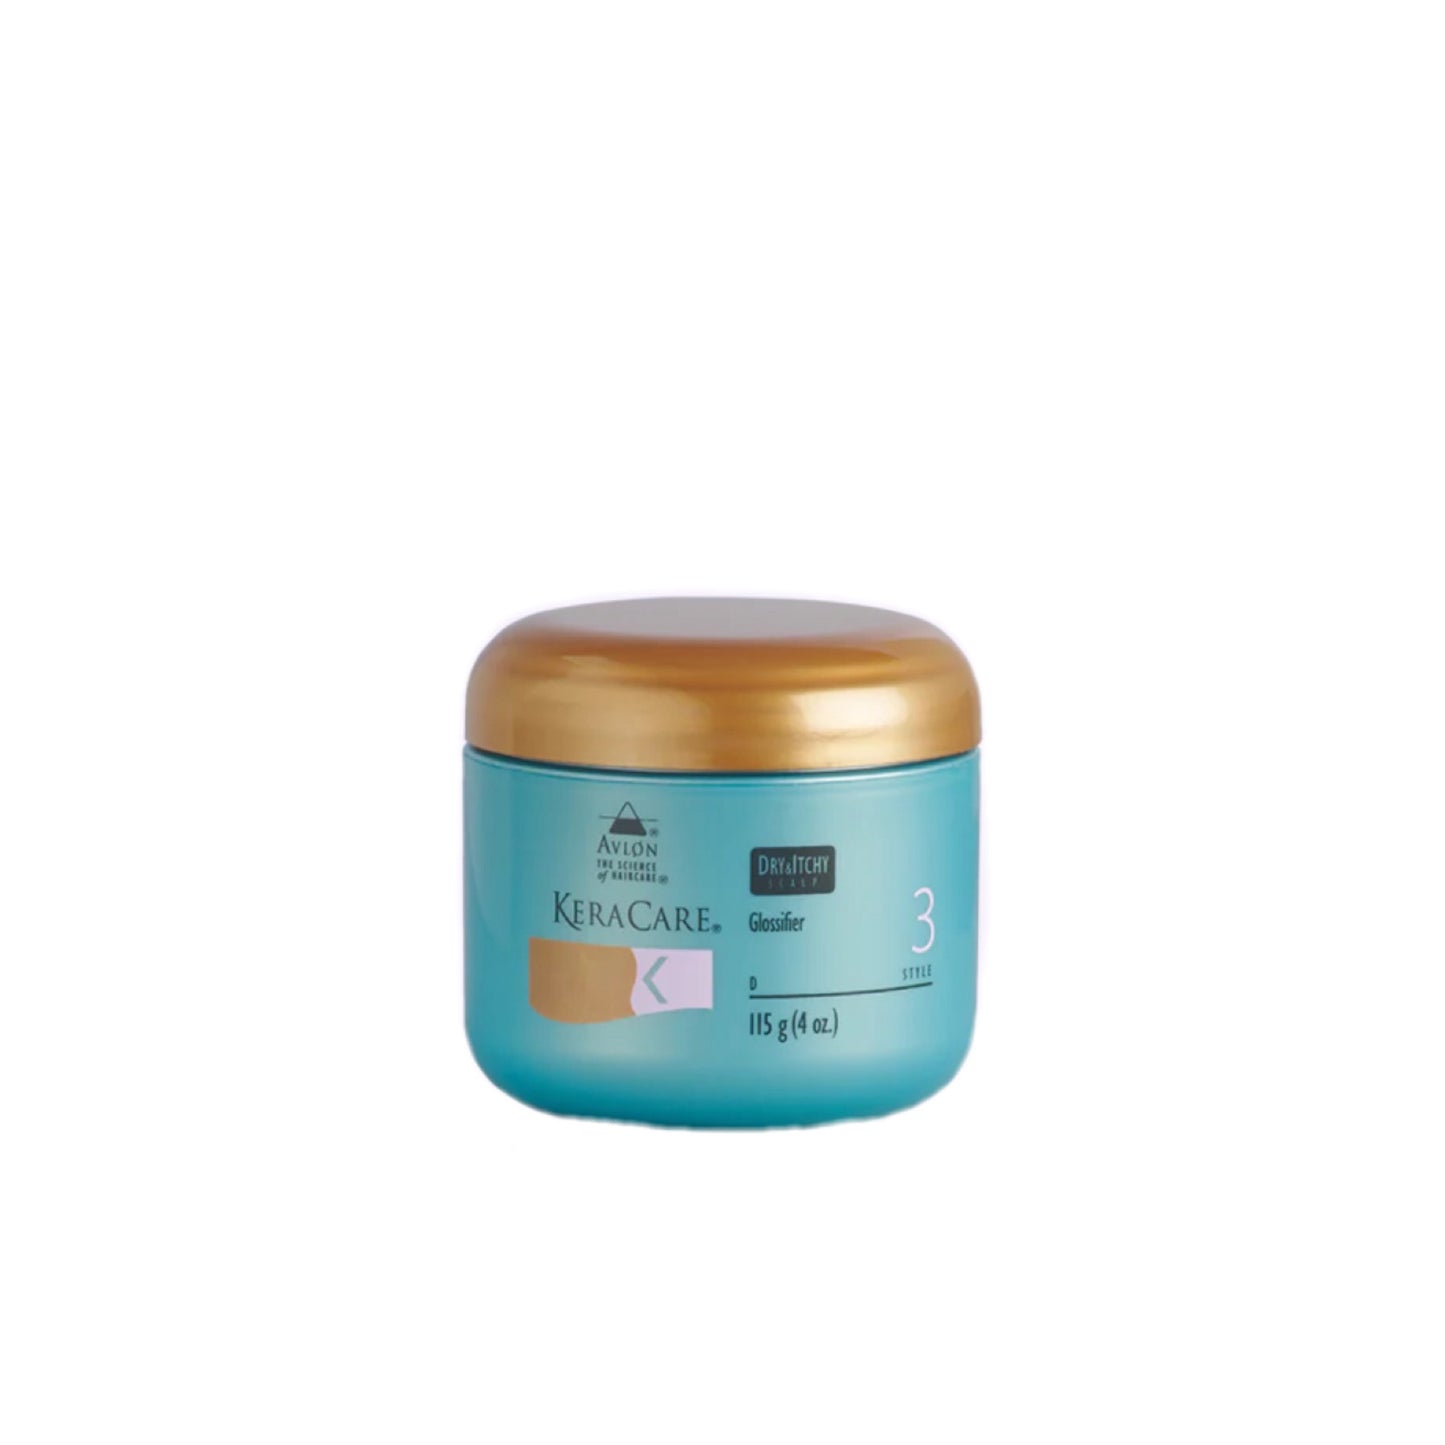 KeraCare Dry & Itchy Scalp Glossifier 115g